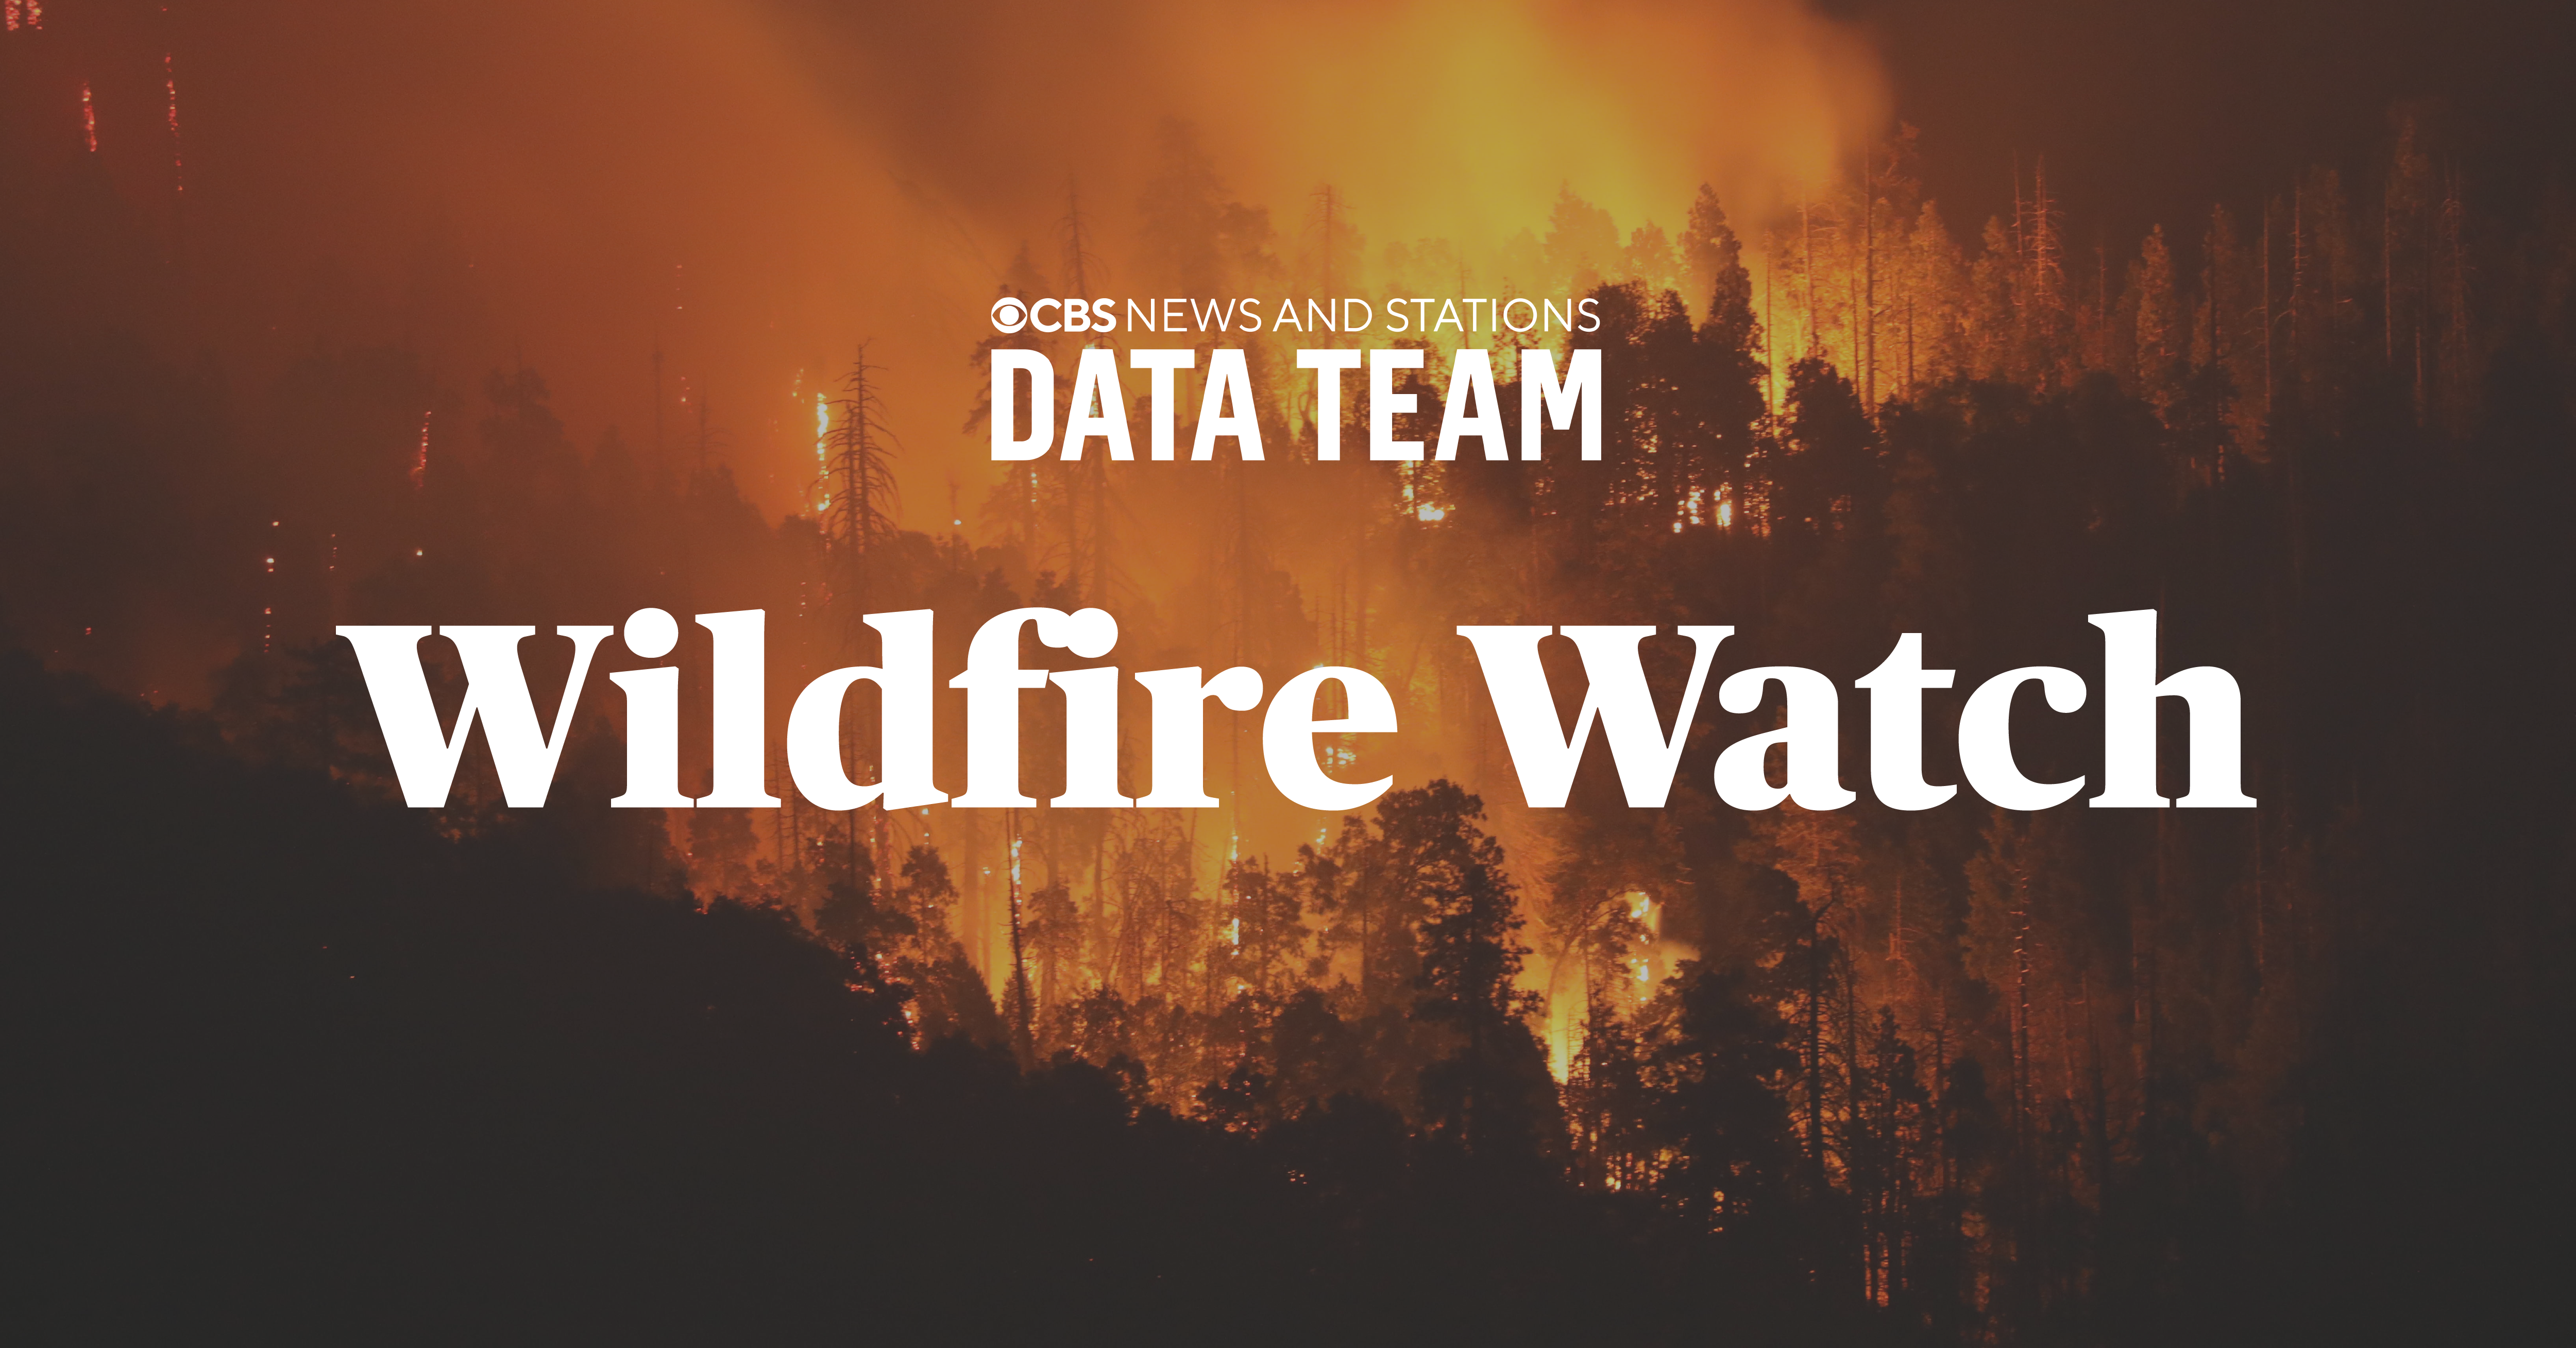 CBS News Wildfire Watch: See wildfire map, perimeters and containment in your area